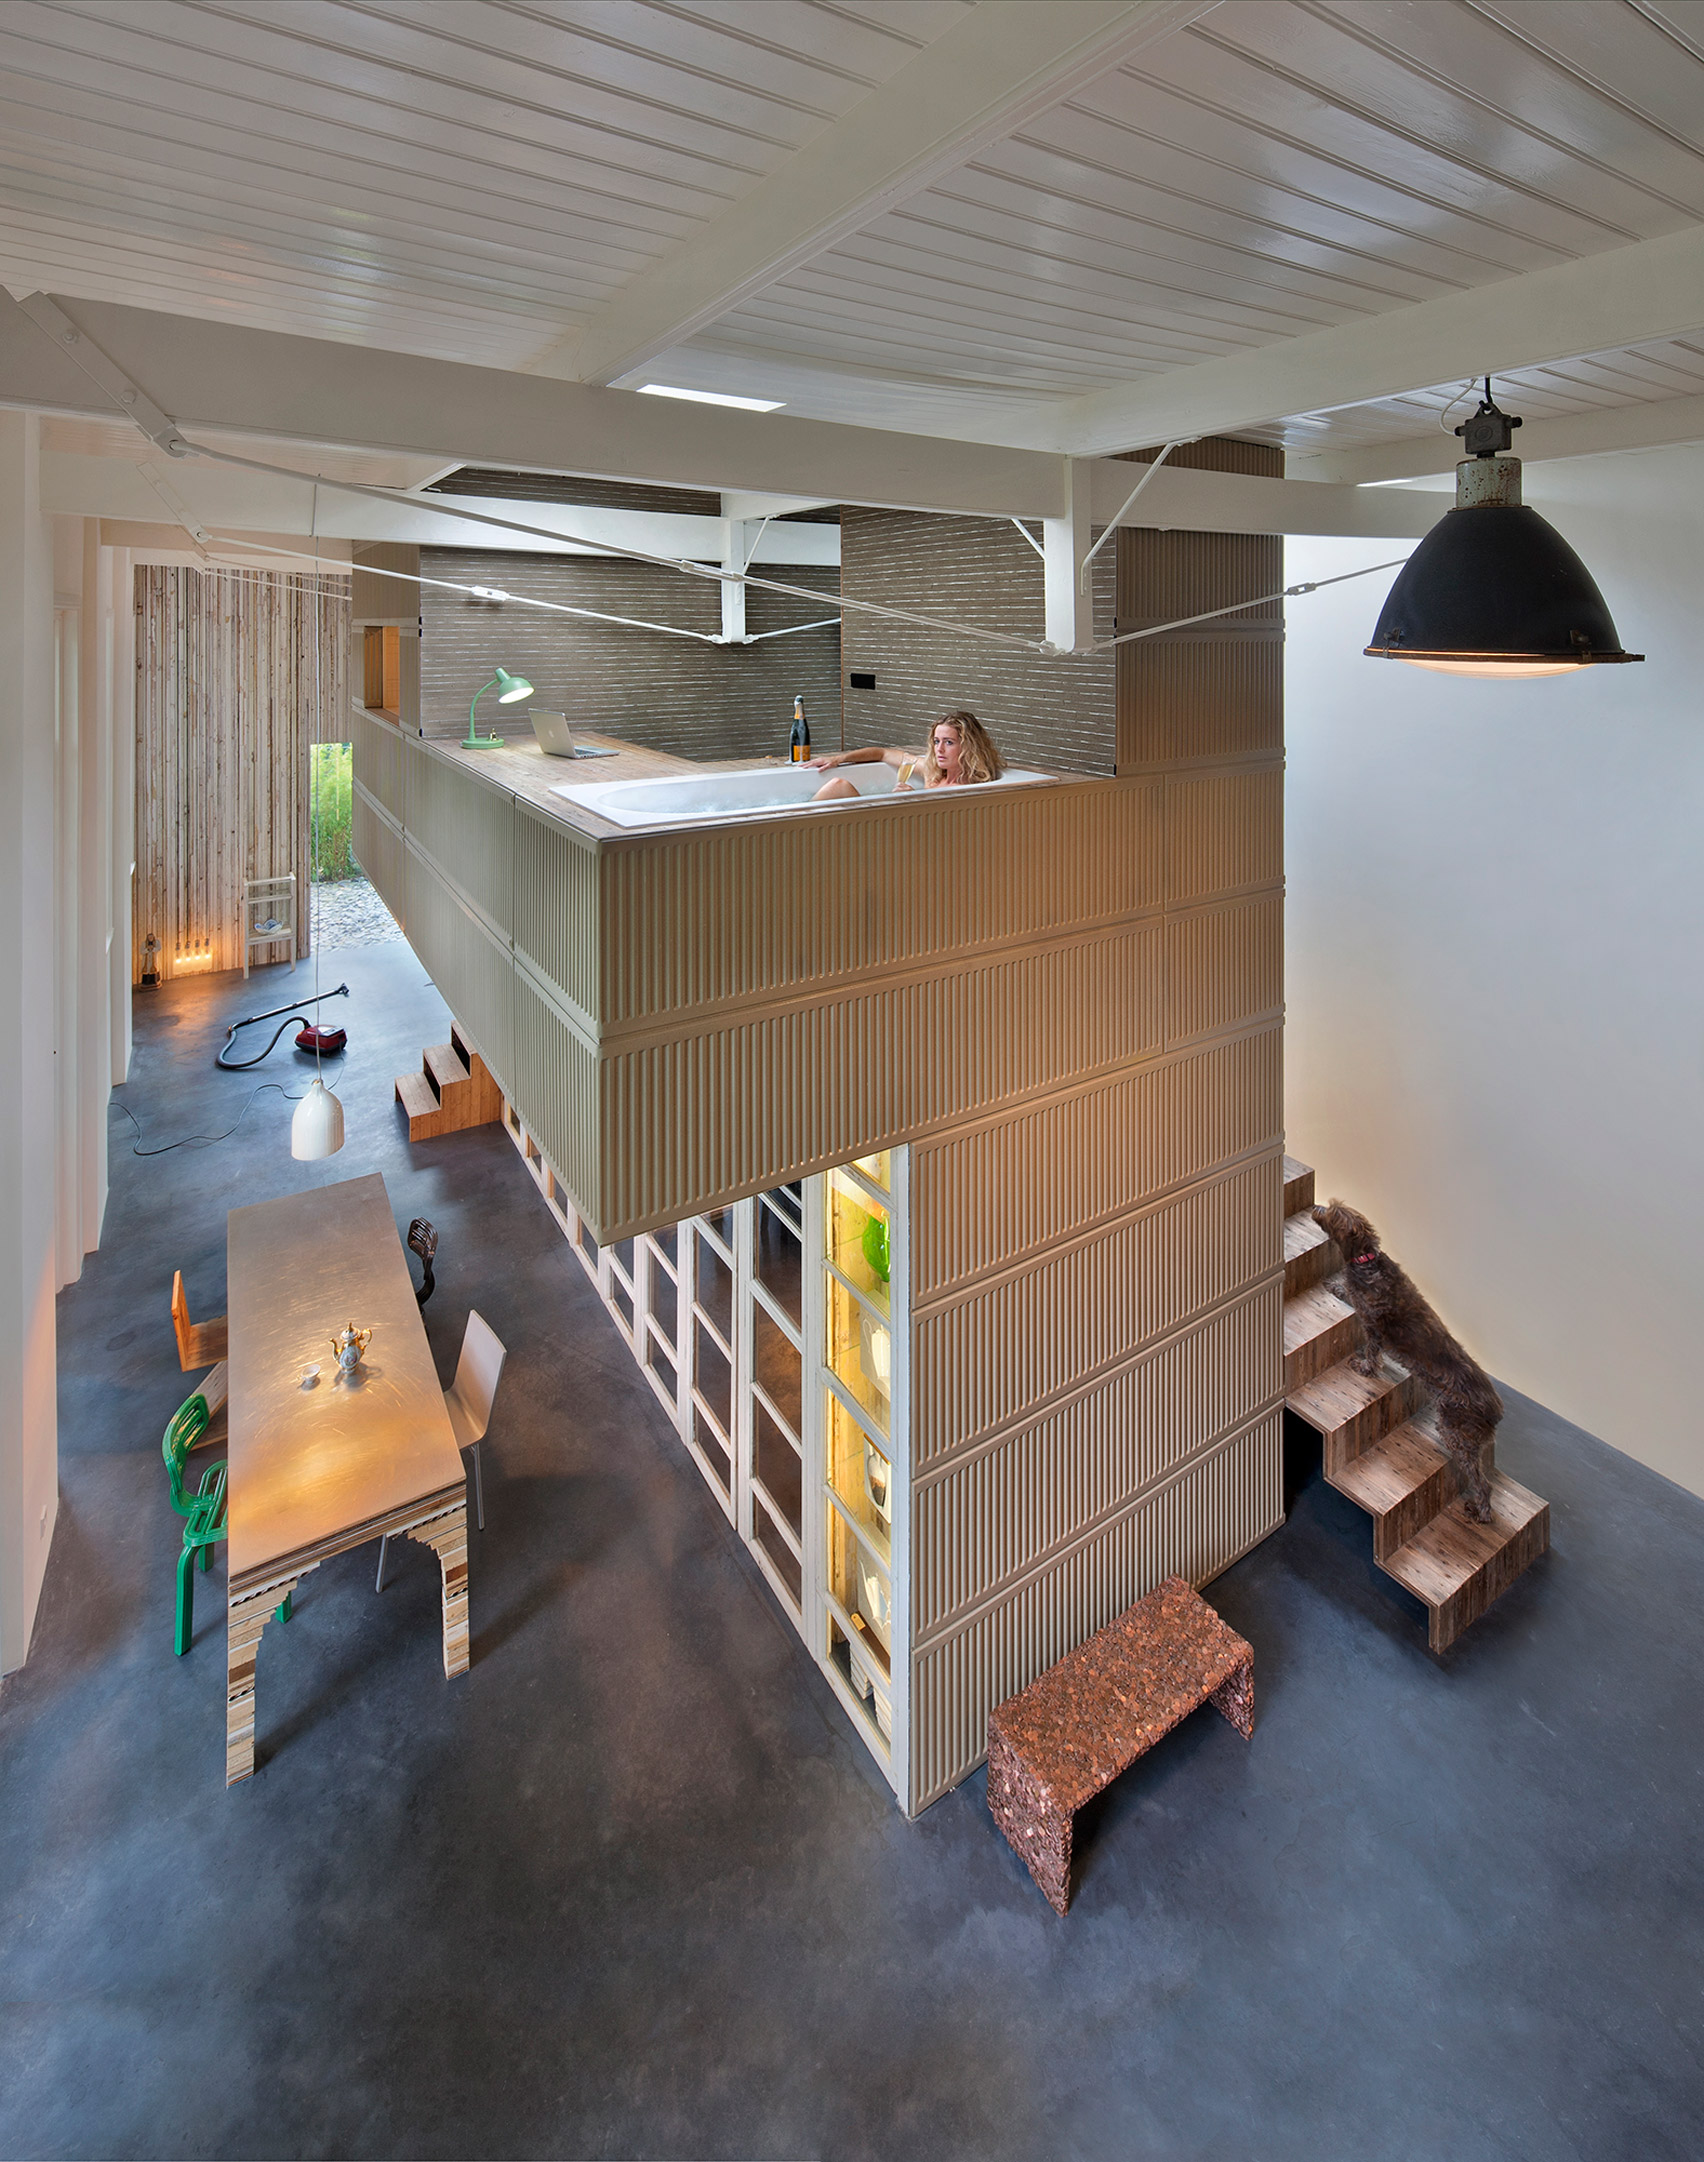 House of Rolf by Rolf Bruggink and Niek Wagemans